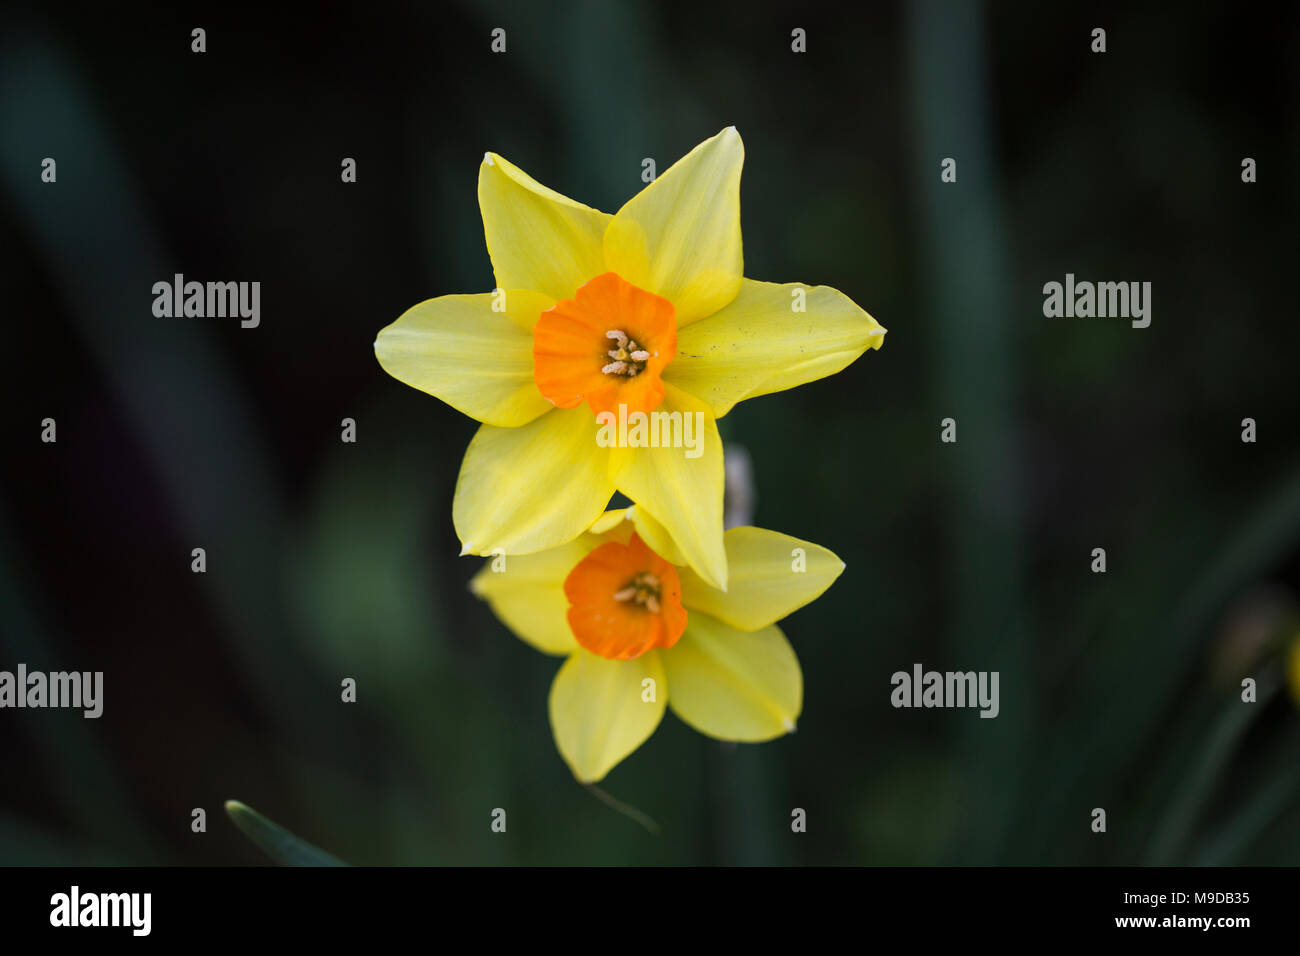 Two daffodils (Narcissus), in the Amaryllidaceae (amaryllis) family. The outer tepals are yellow and the corona is orange and trumpet-shaped. Stock Photo